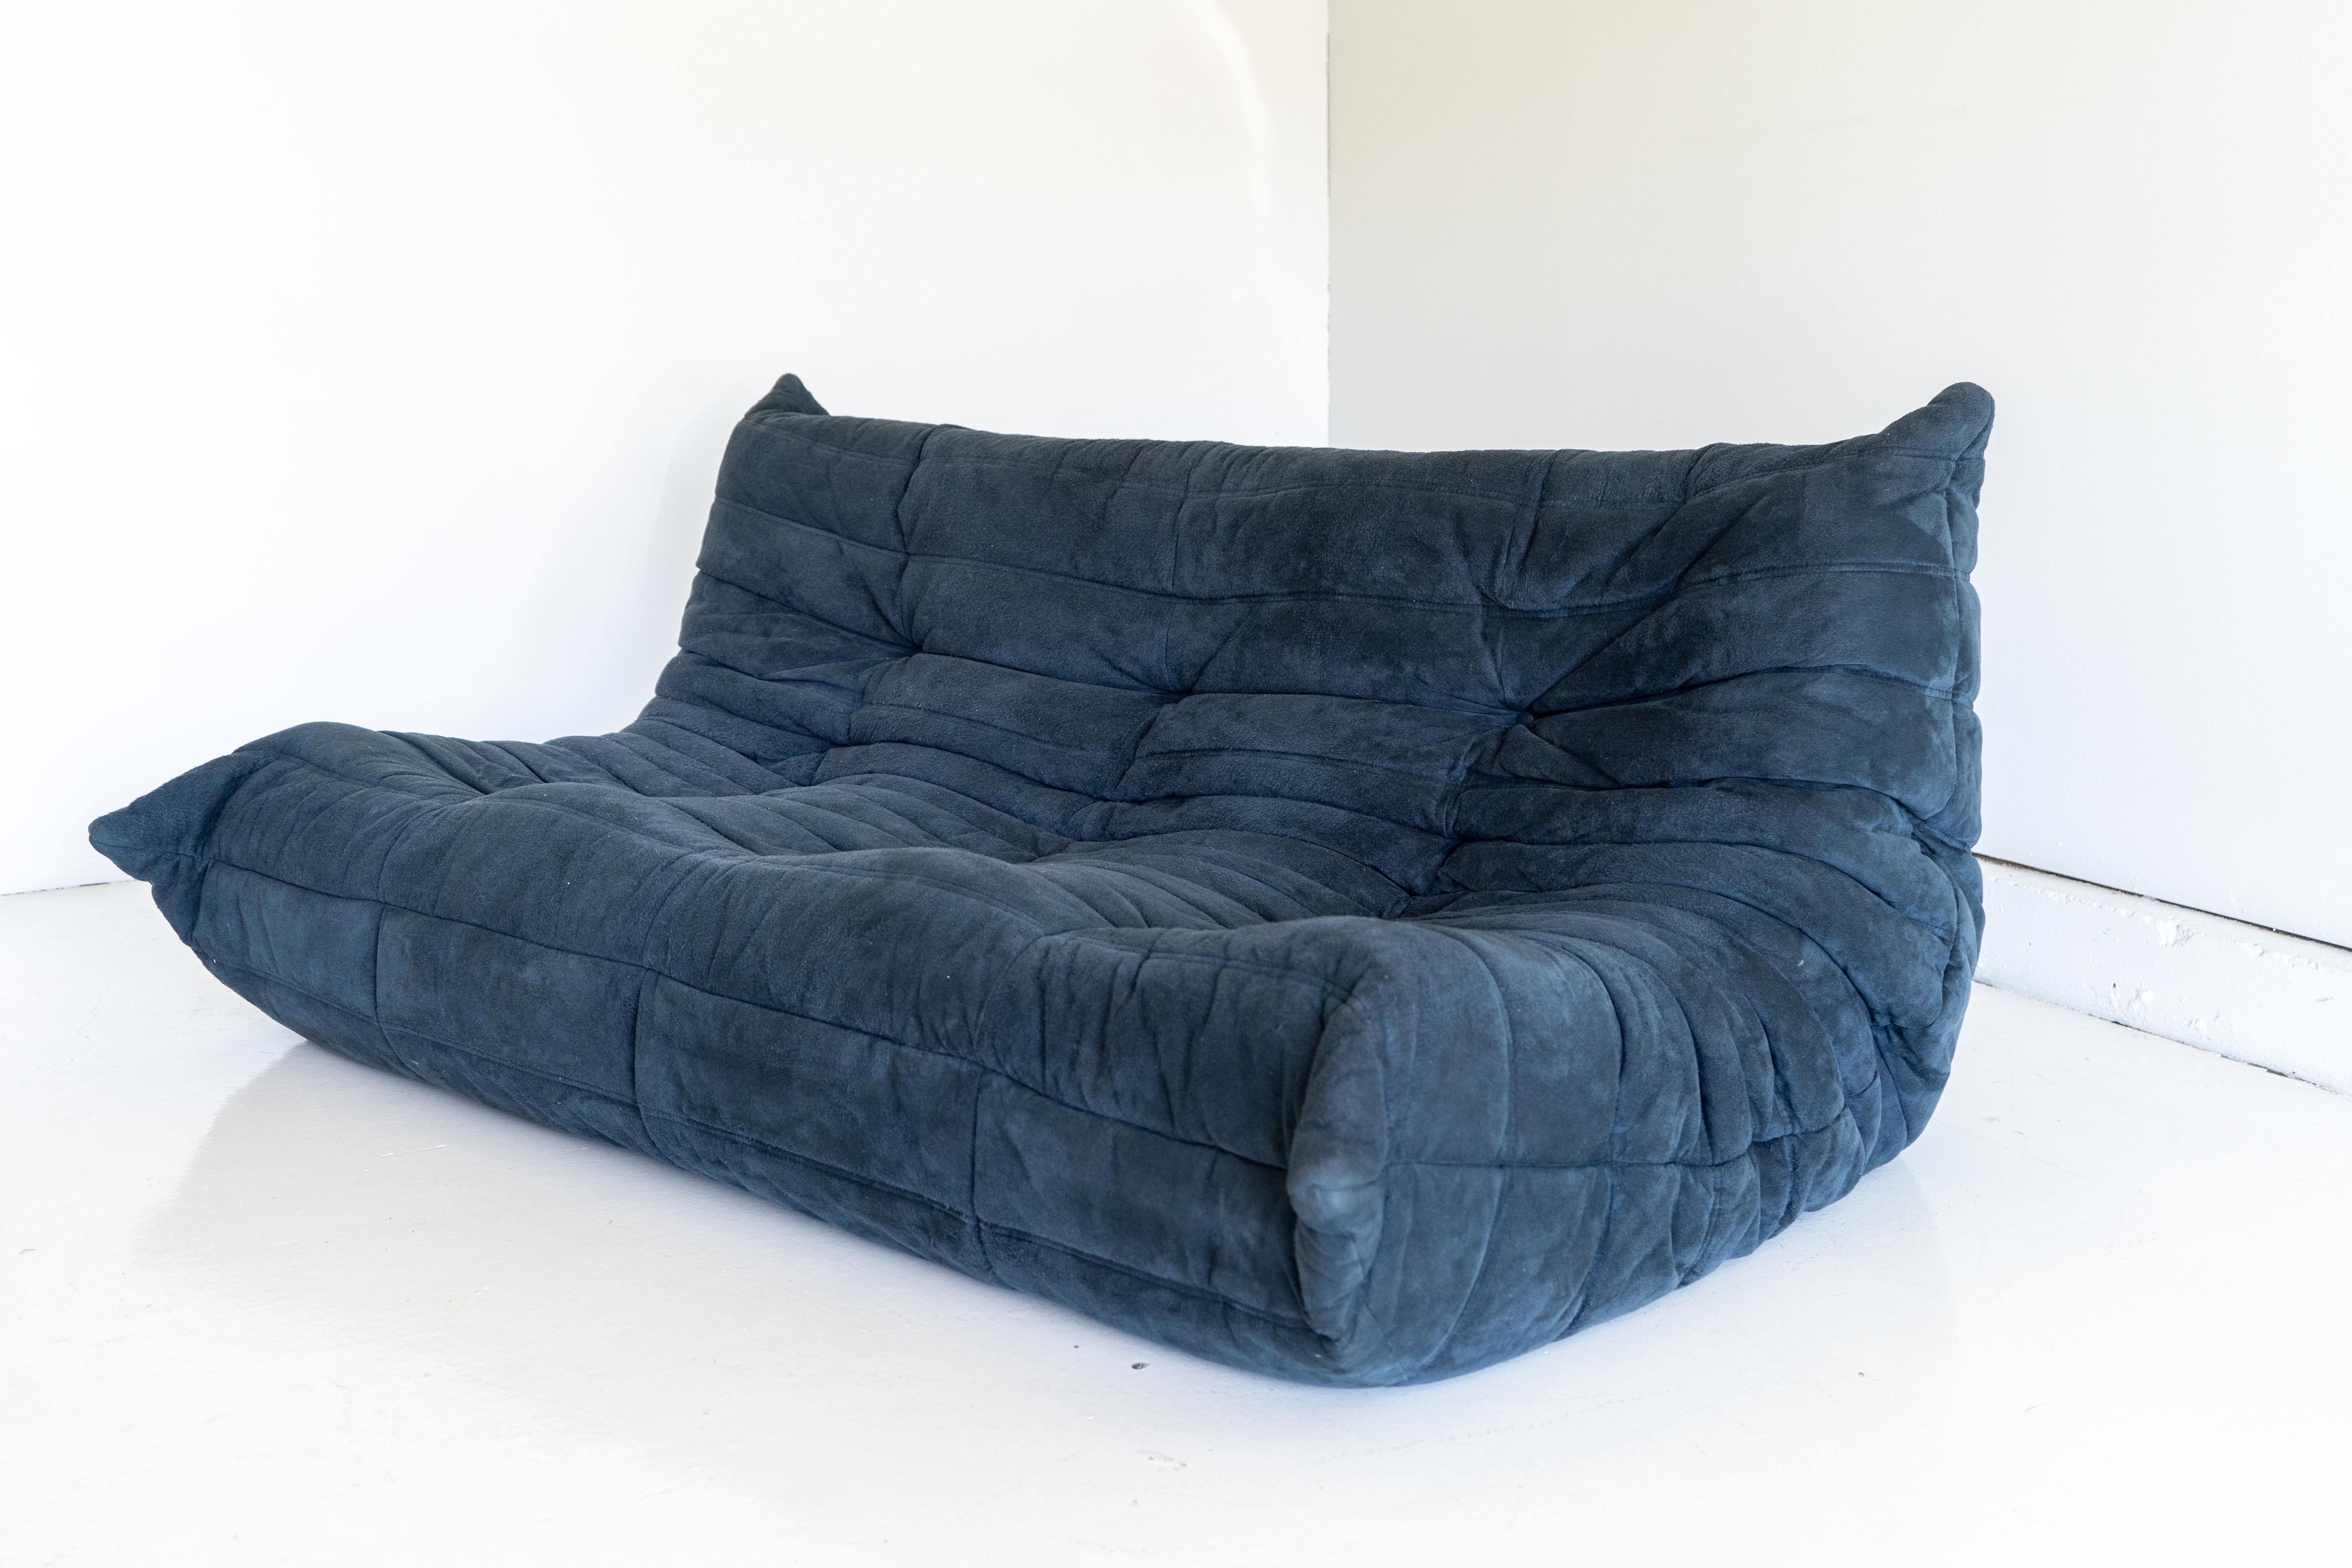 Vintage 3-seater Togo sofa in dark blue Alcantara. Suede shows normal wear from age but remains in good condition.